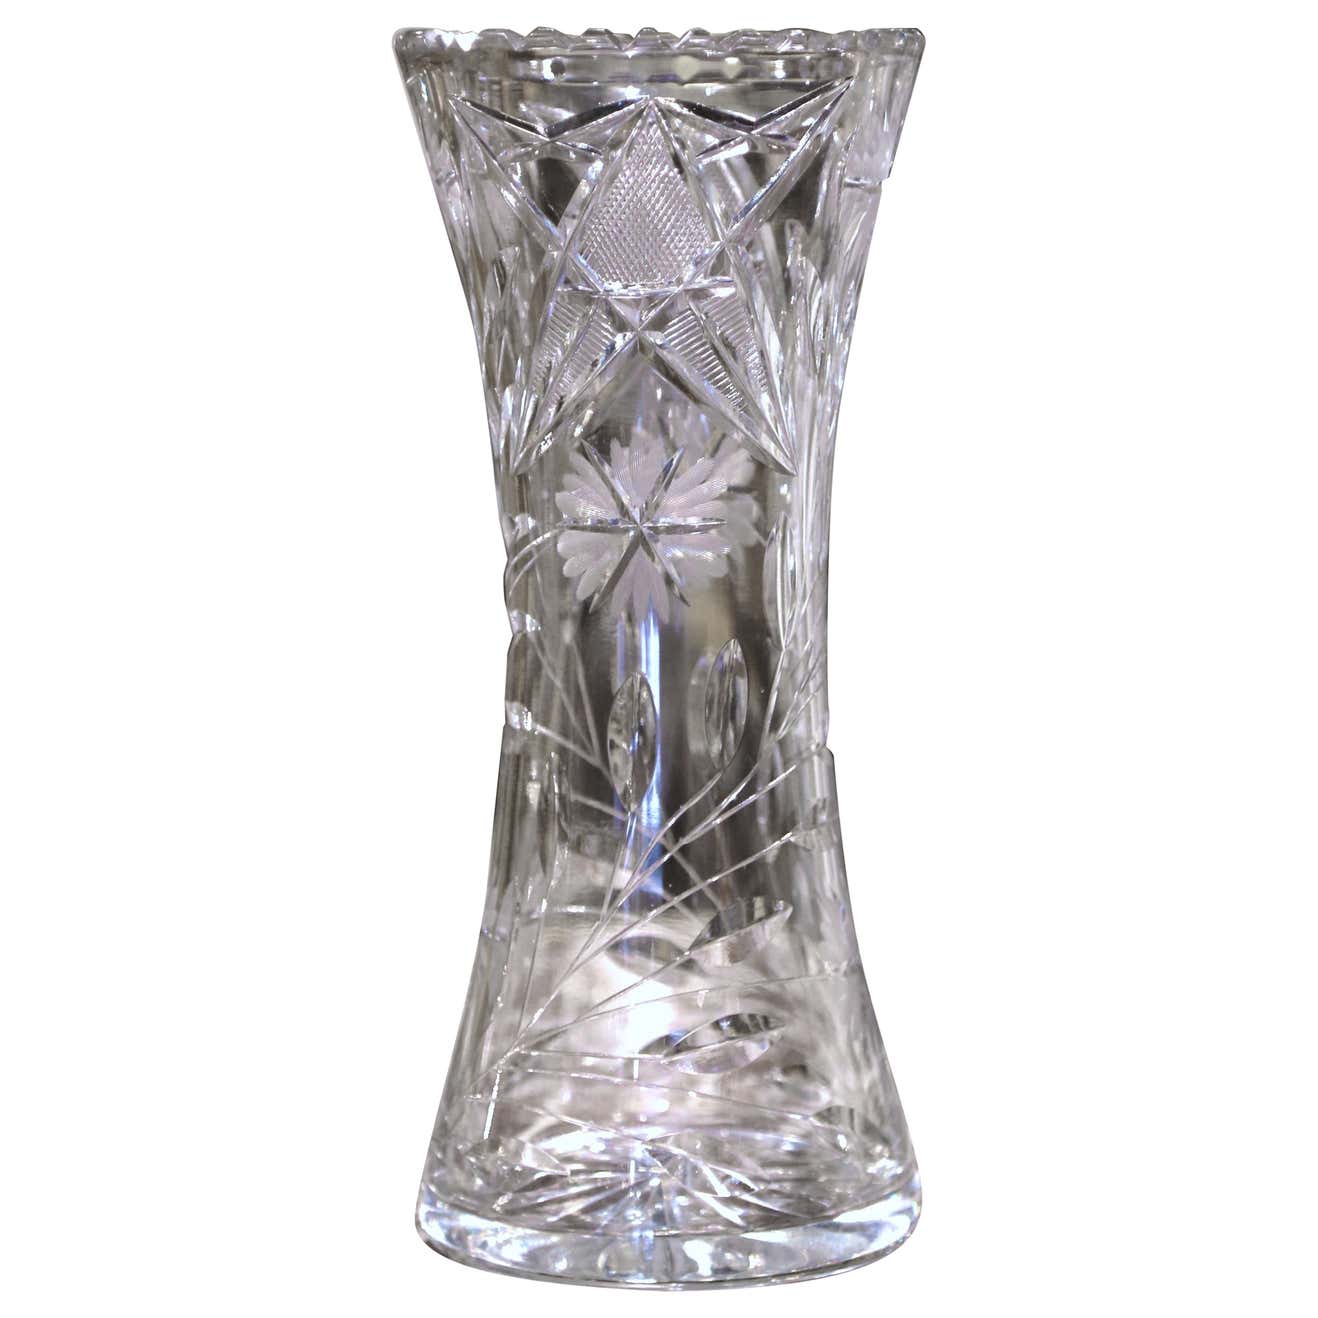 Vintage Cut Crystal Trumpet Vase with Frosted and Etched Leaf and Floral Motifs Country French Interiors